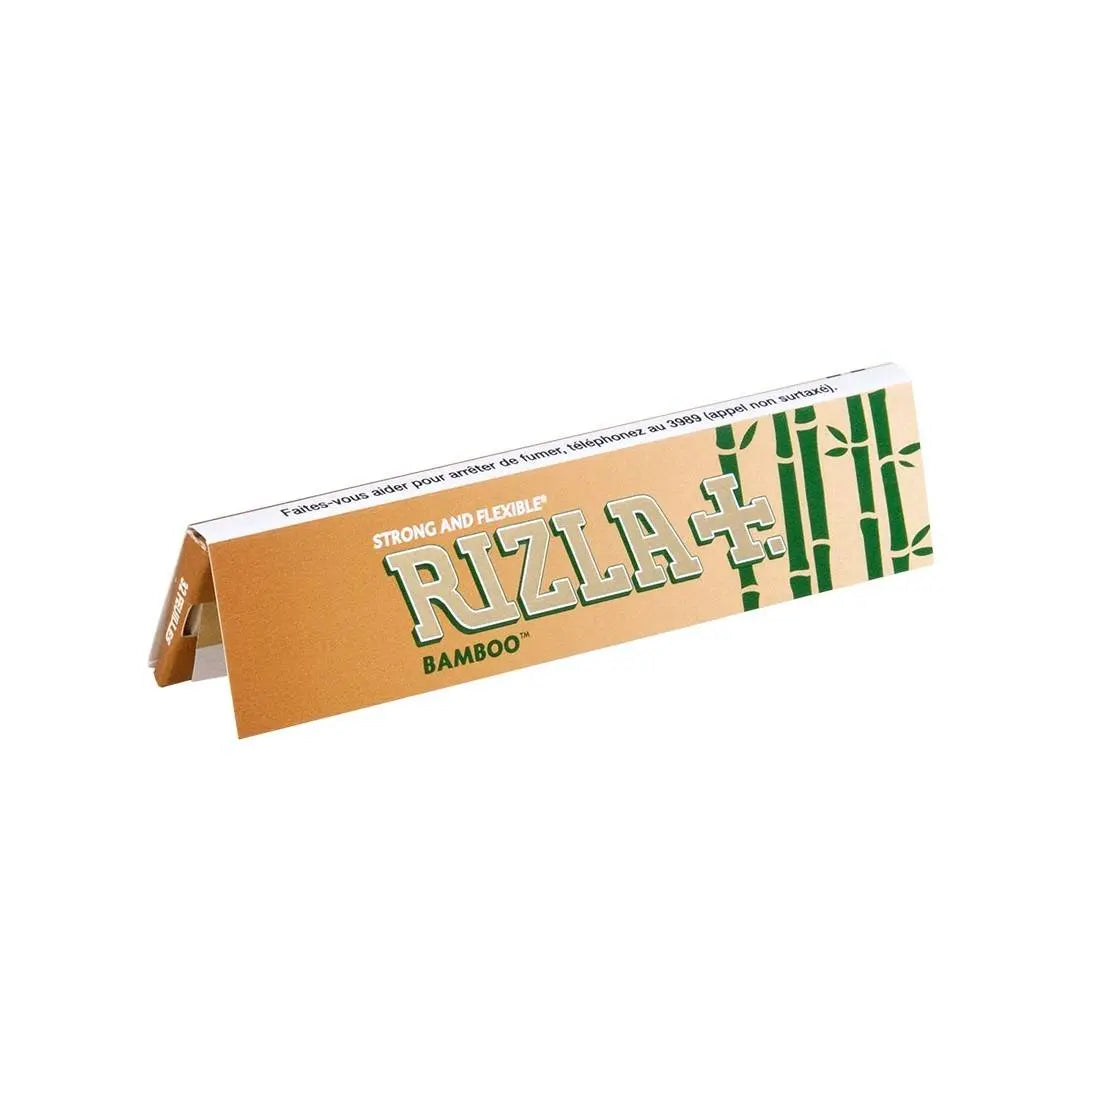 Rizla Bamboo King Size Slim Rolling Papers - Rizla - Rolling Papers - Rolling Refills